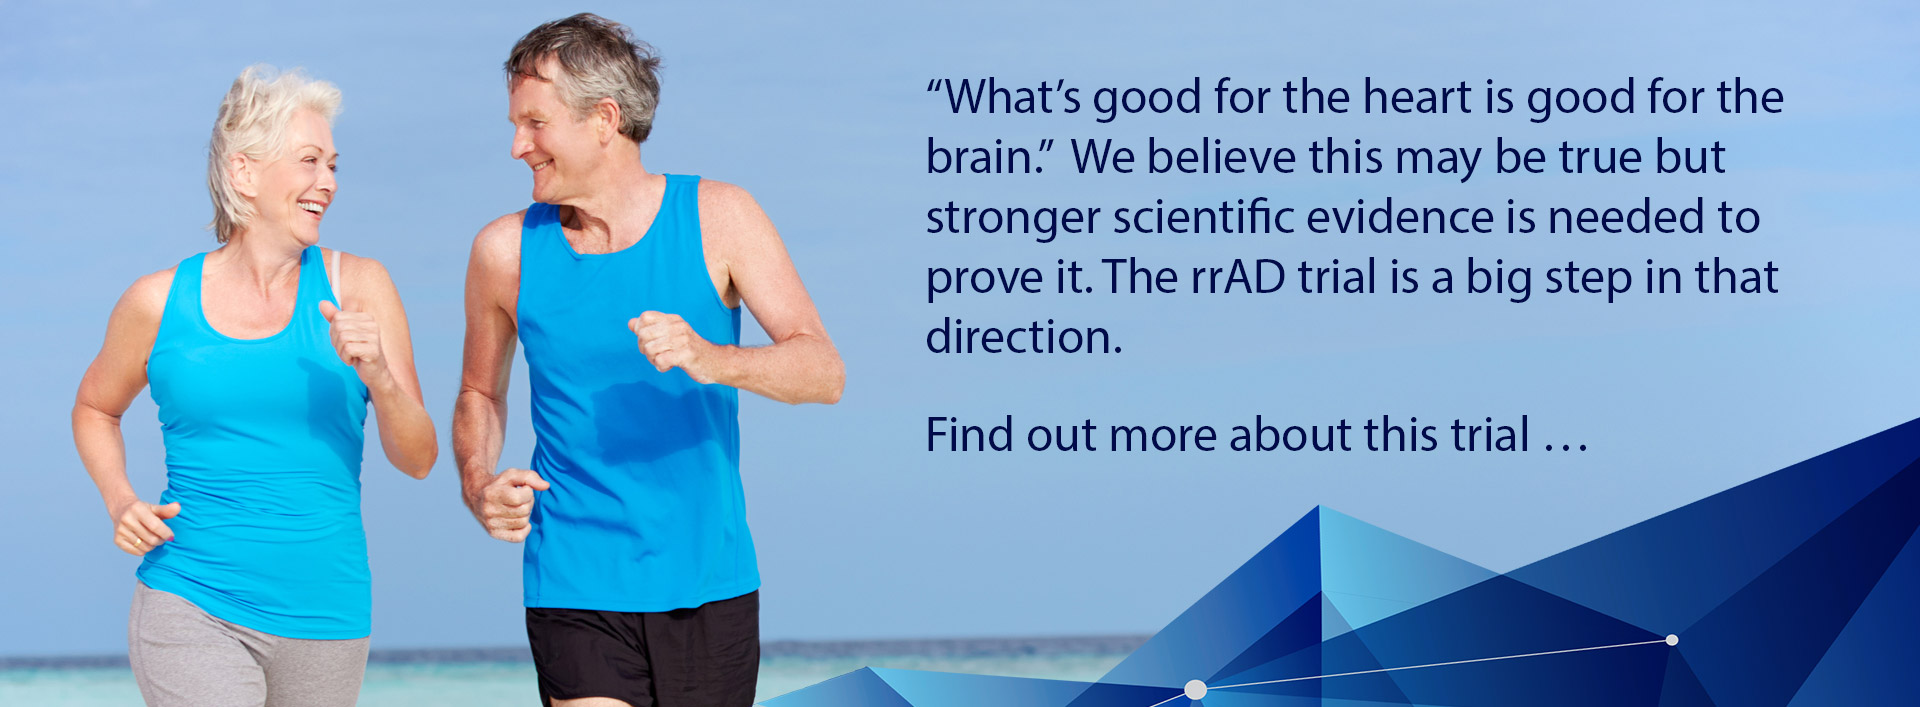 “What’s good for the heart is good for the brain.” We believe this may be true but stronger scientific evidence is needed to prove it. The rrAD trial is a big step in that direction. Find out more about this trial